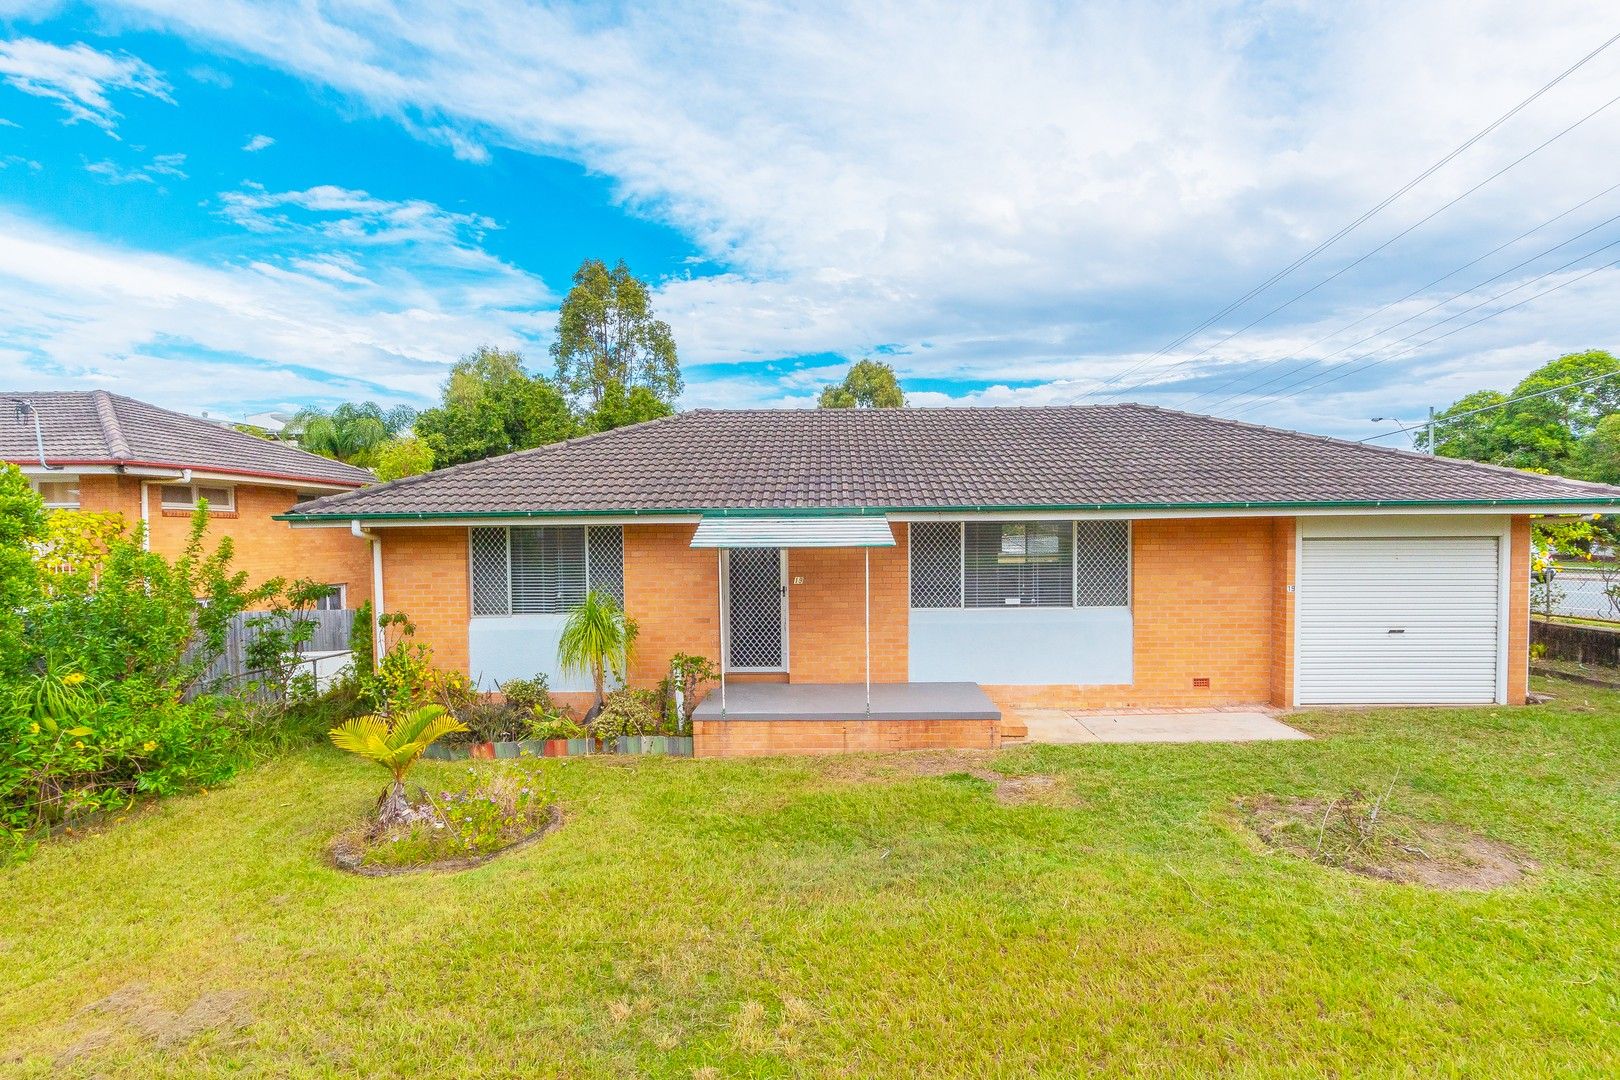 2 bedrooms House in 19 Mcnaughton Street REDCLIFFE QLD, 4020